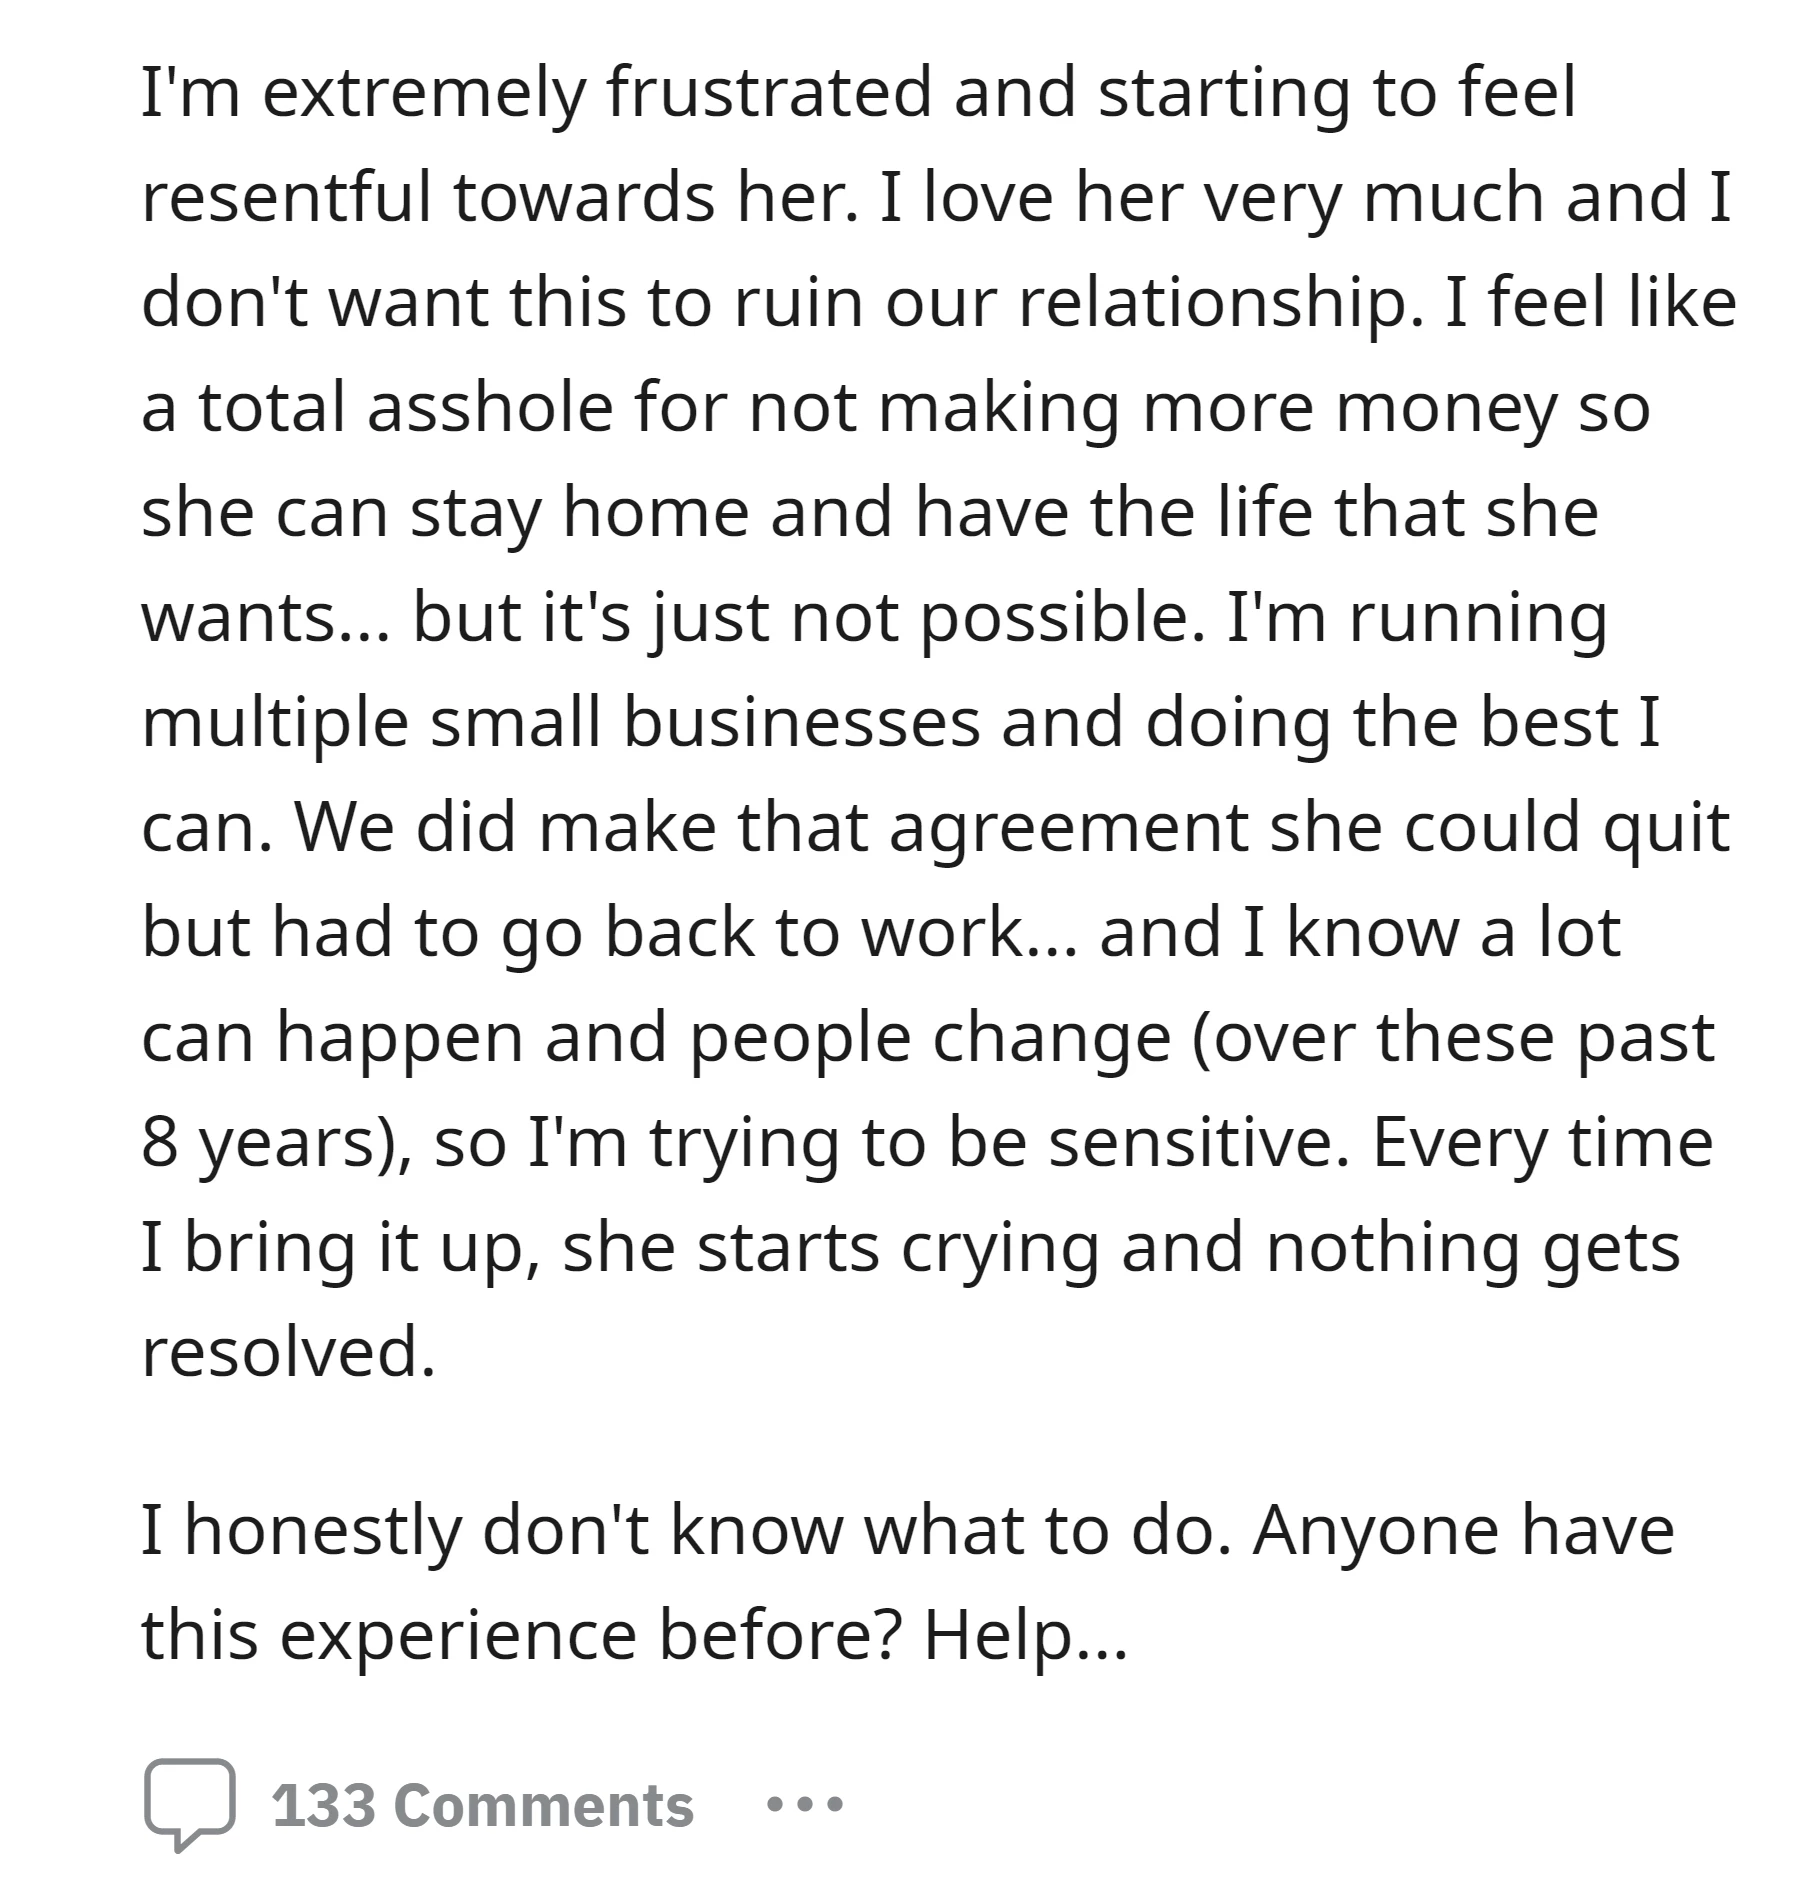 OP is feeling frustrated and resentful towards his wife for not returning to work